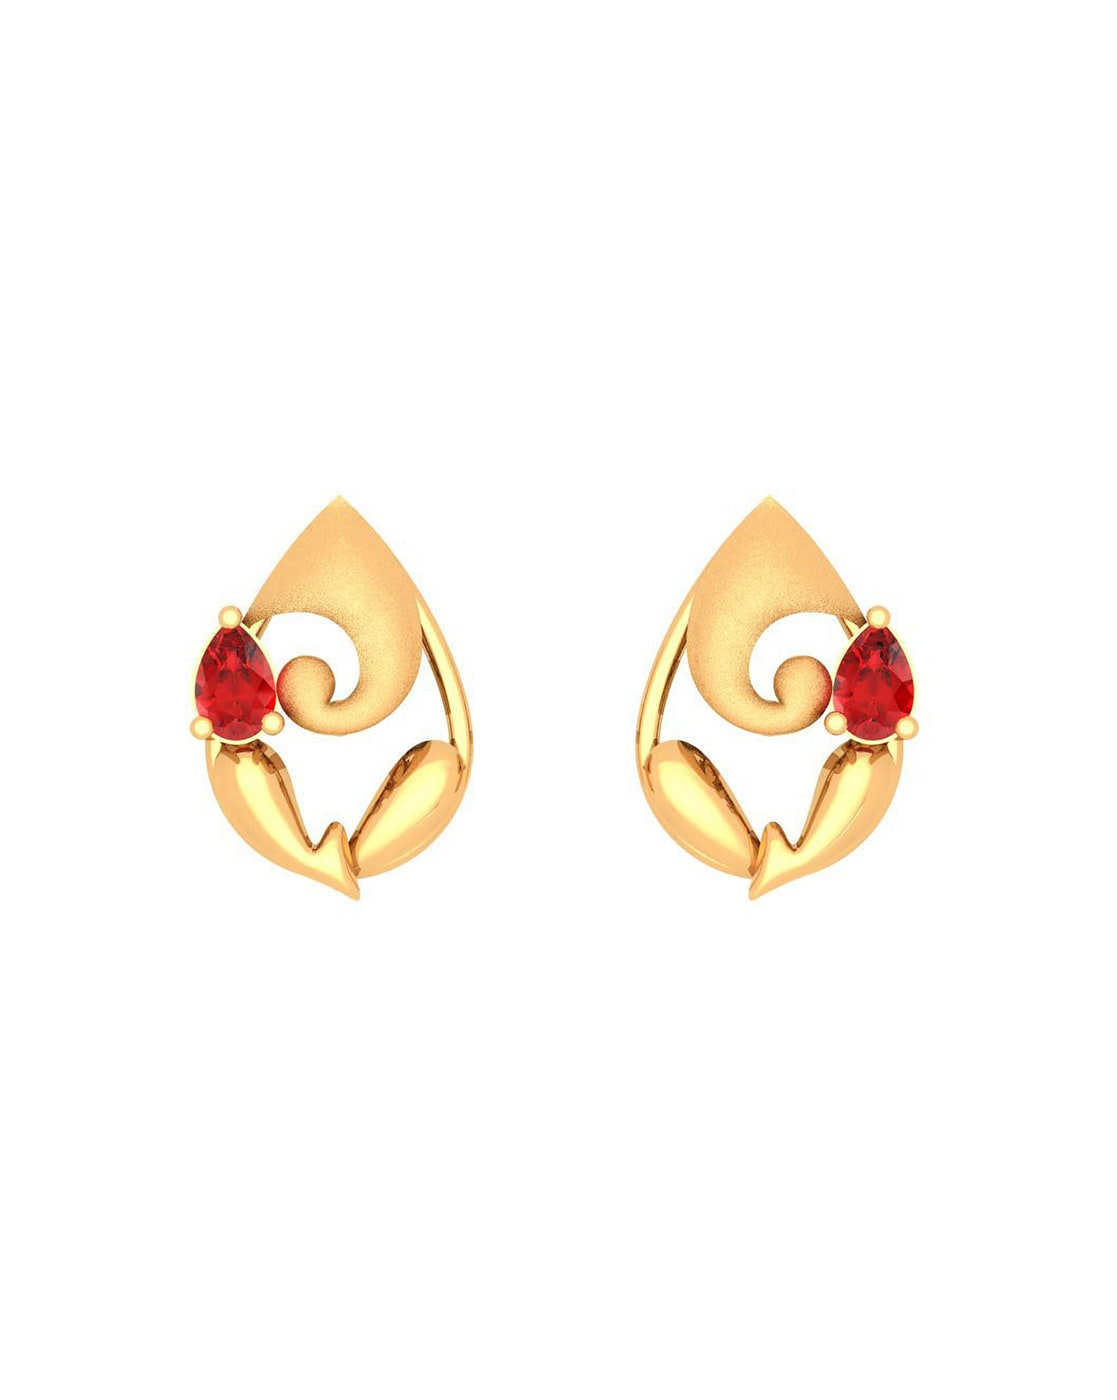 14K Gold-Plated Open Heart Stud Earrings for Kids with Screw Backs –  Cherished Moments Jewelry